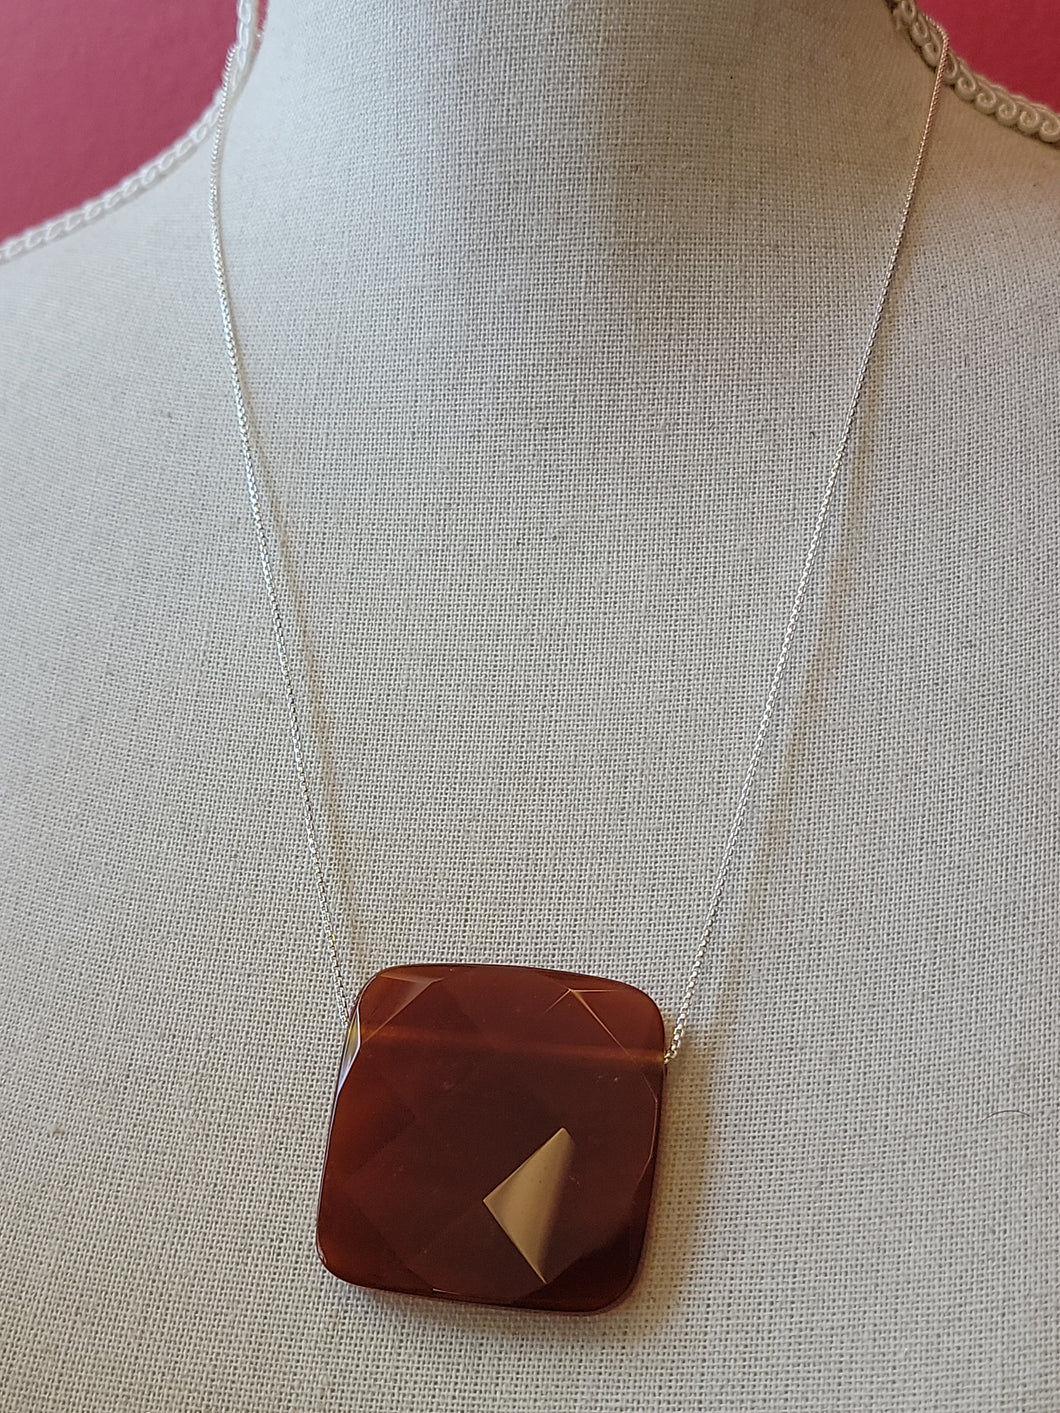 S.S. Faceted Carnelian Necklaces